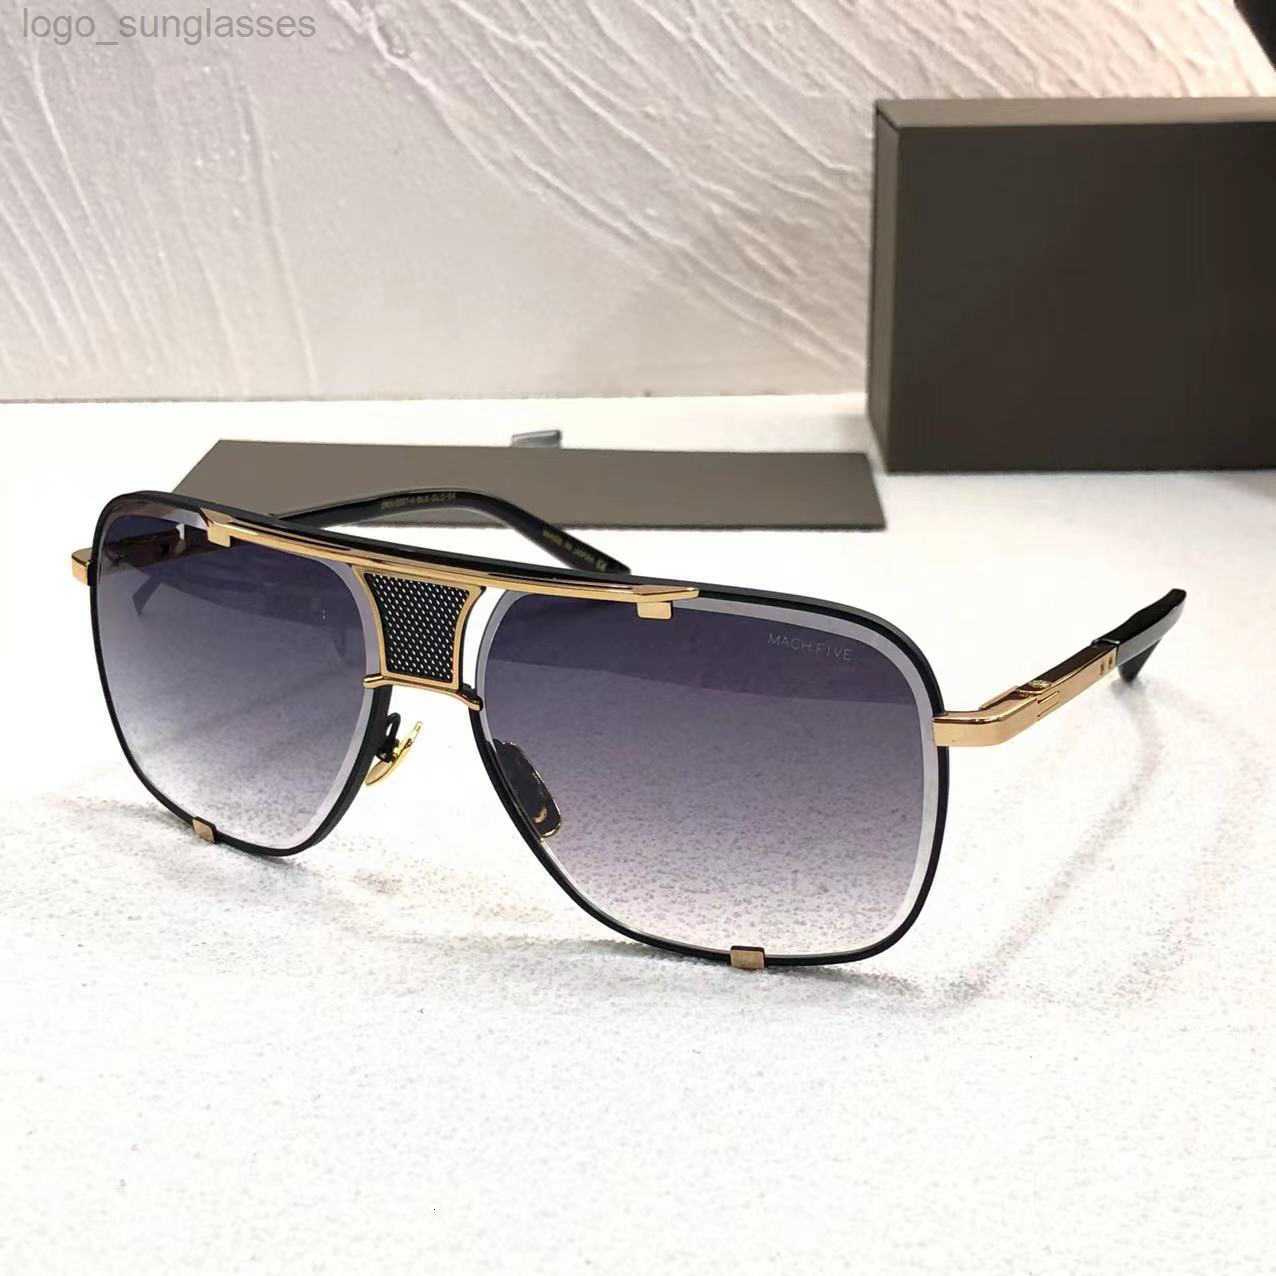 

A DITA MACH FIVE DRX-2087 Top luxury high quality brand Designer Sunglasses for men women new selling world famous fashion show Italian sunglasses uv400 with box